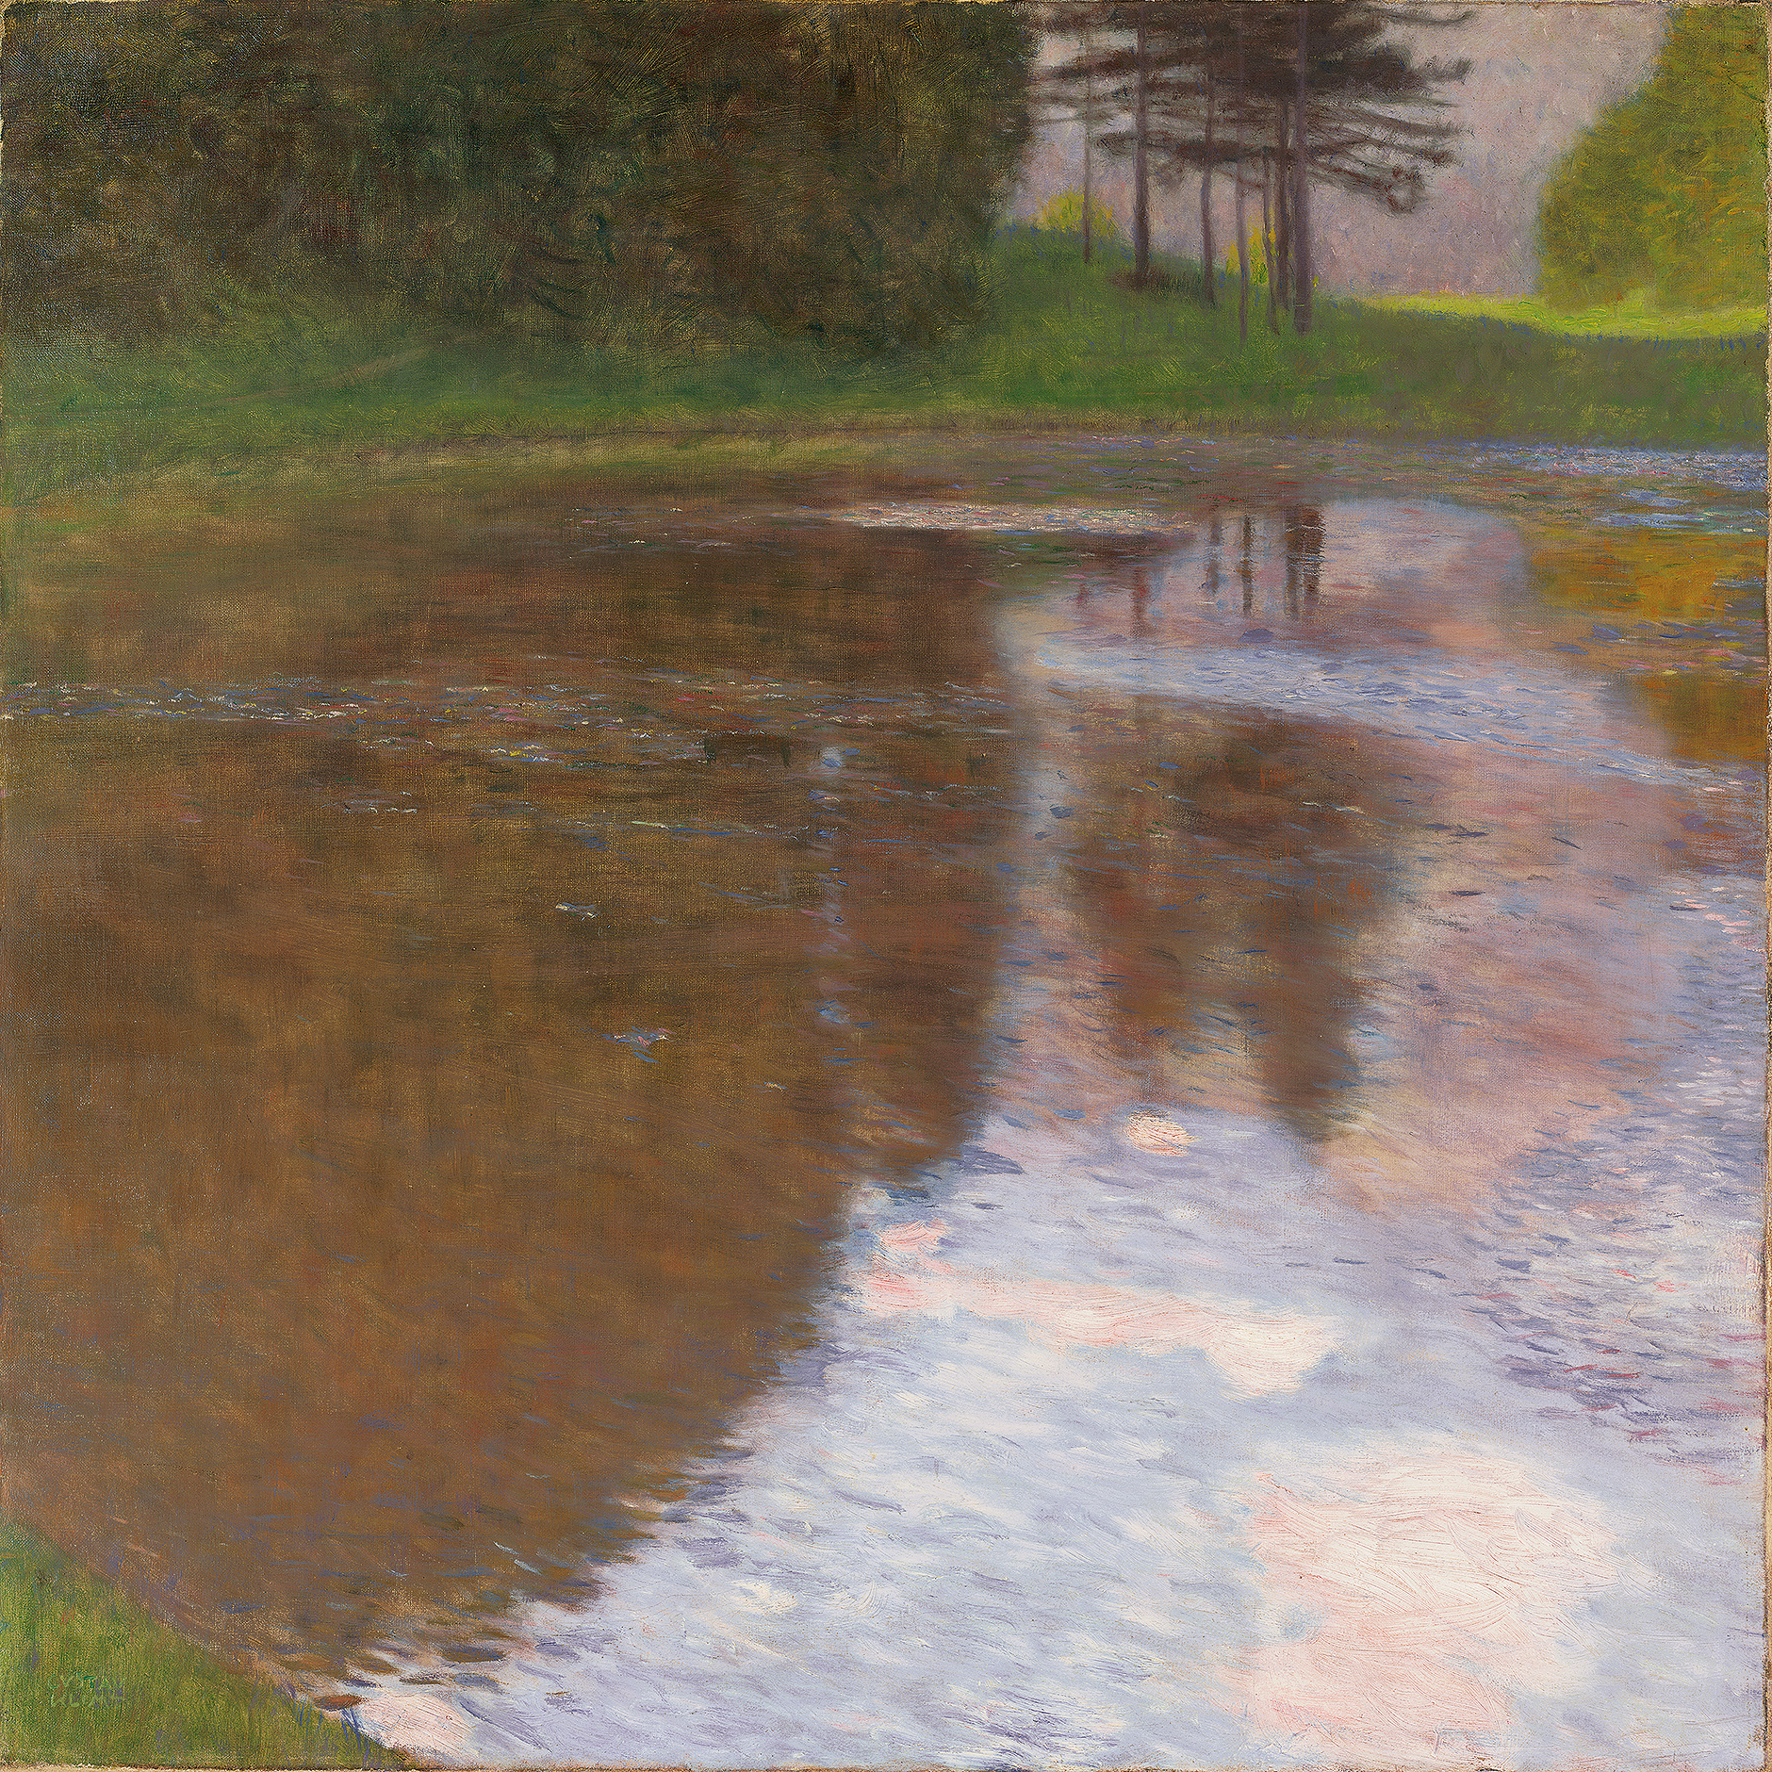 Painting by Gustav Klimt, A Morning by the Pond (1899)